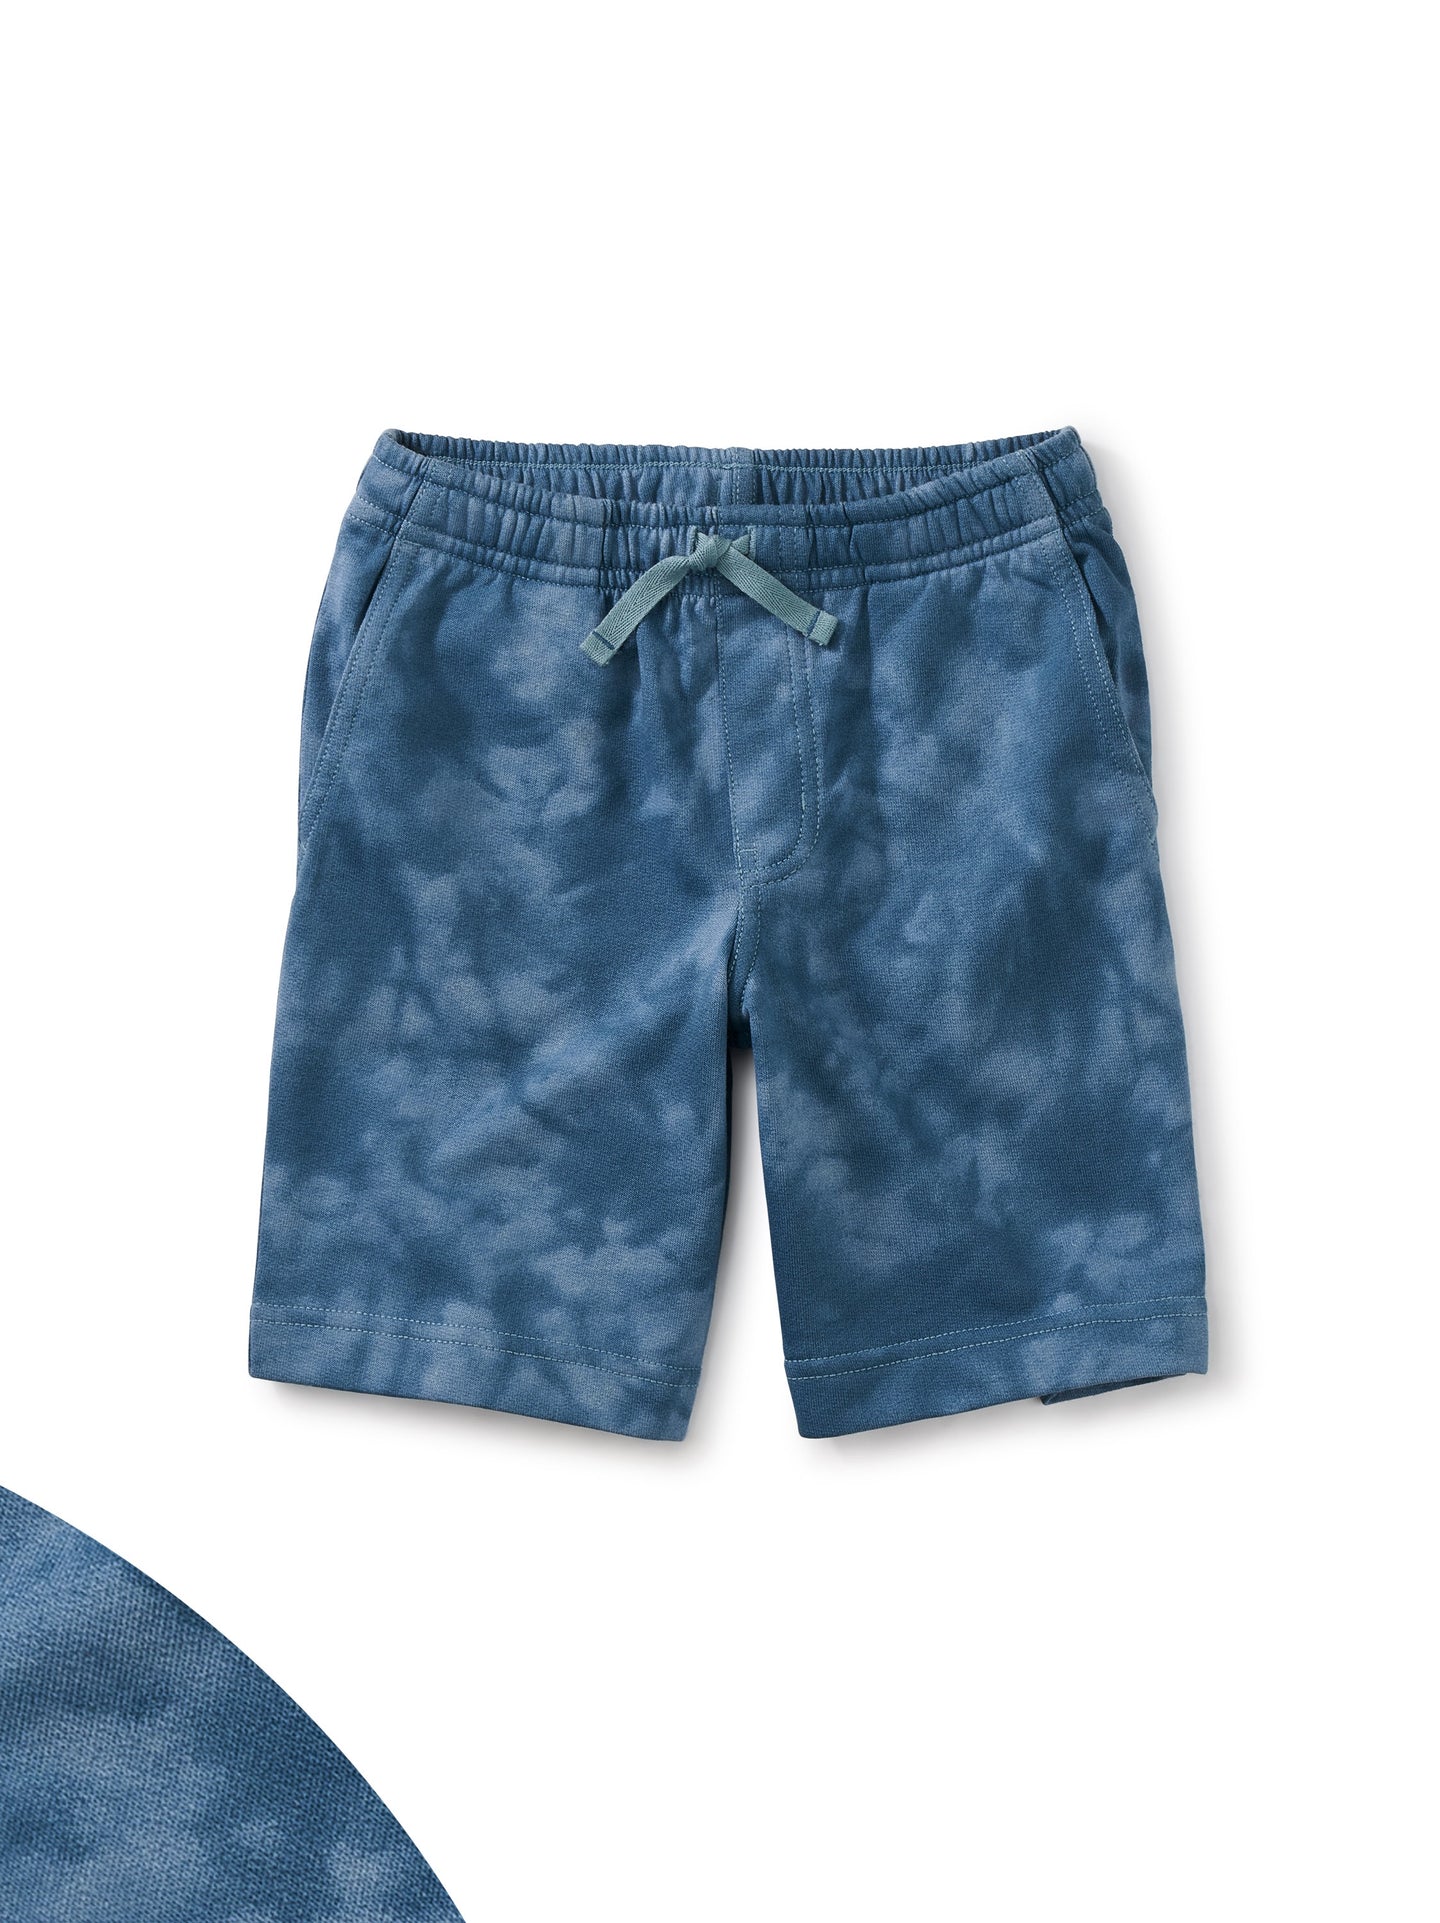 Tea Collection - Vacation Shorts - Tie Dye in Steel Blue